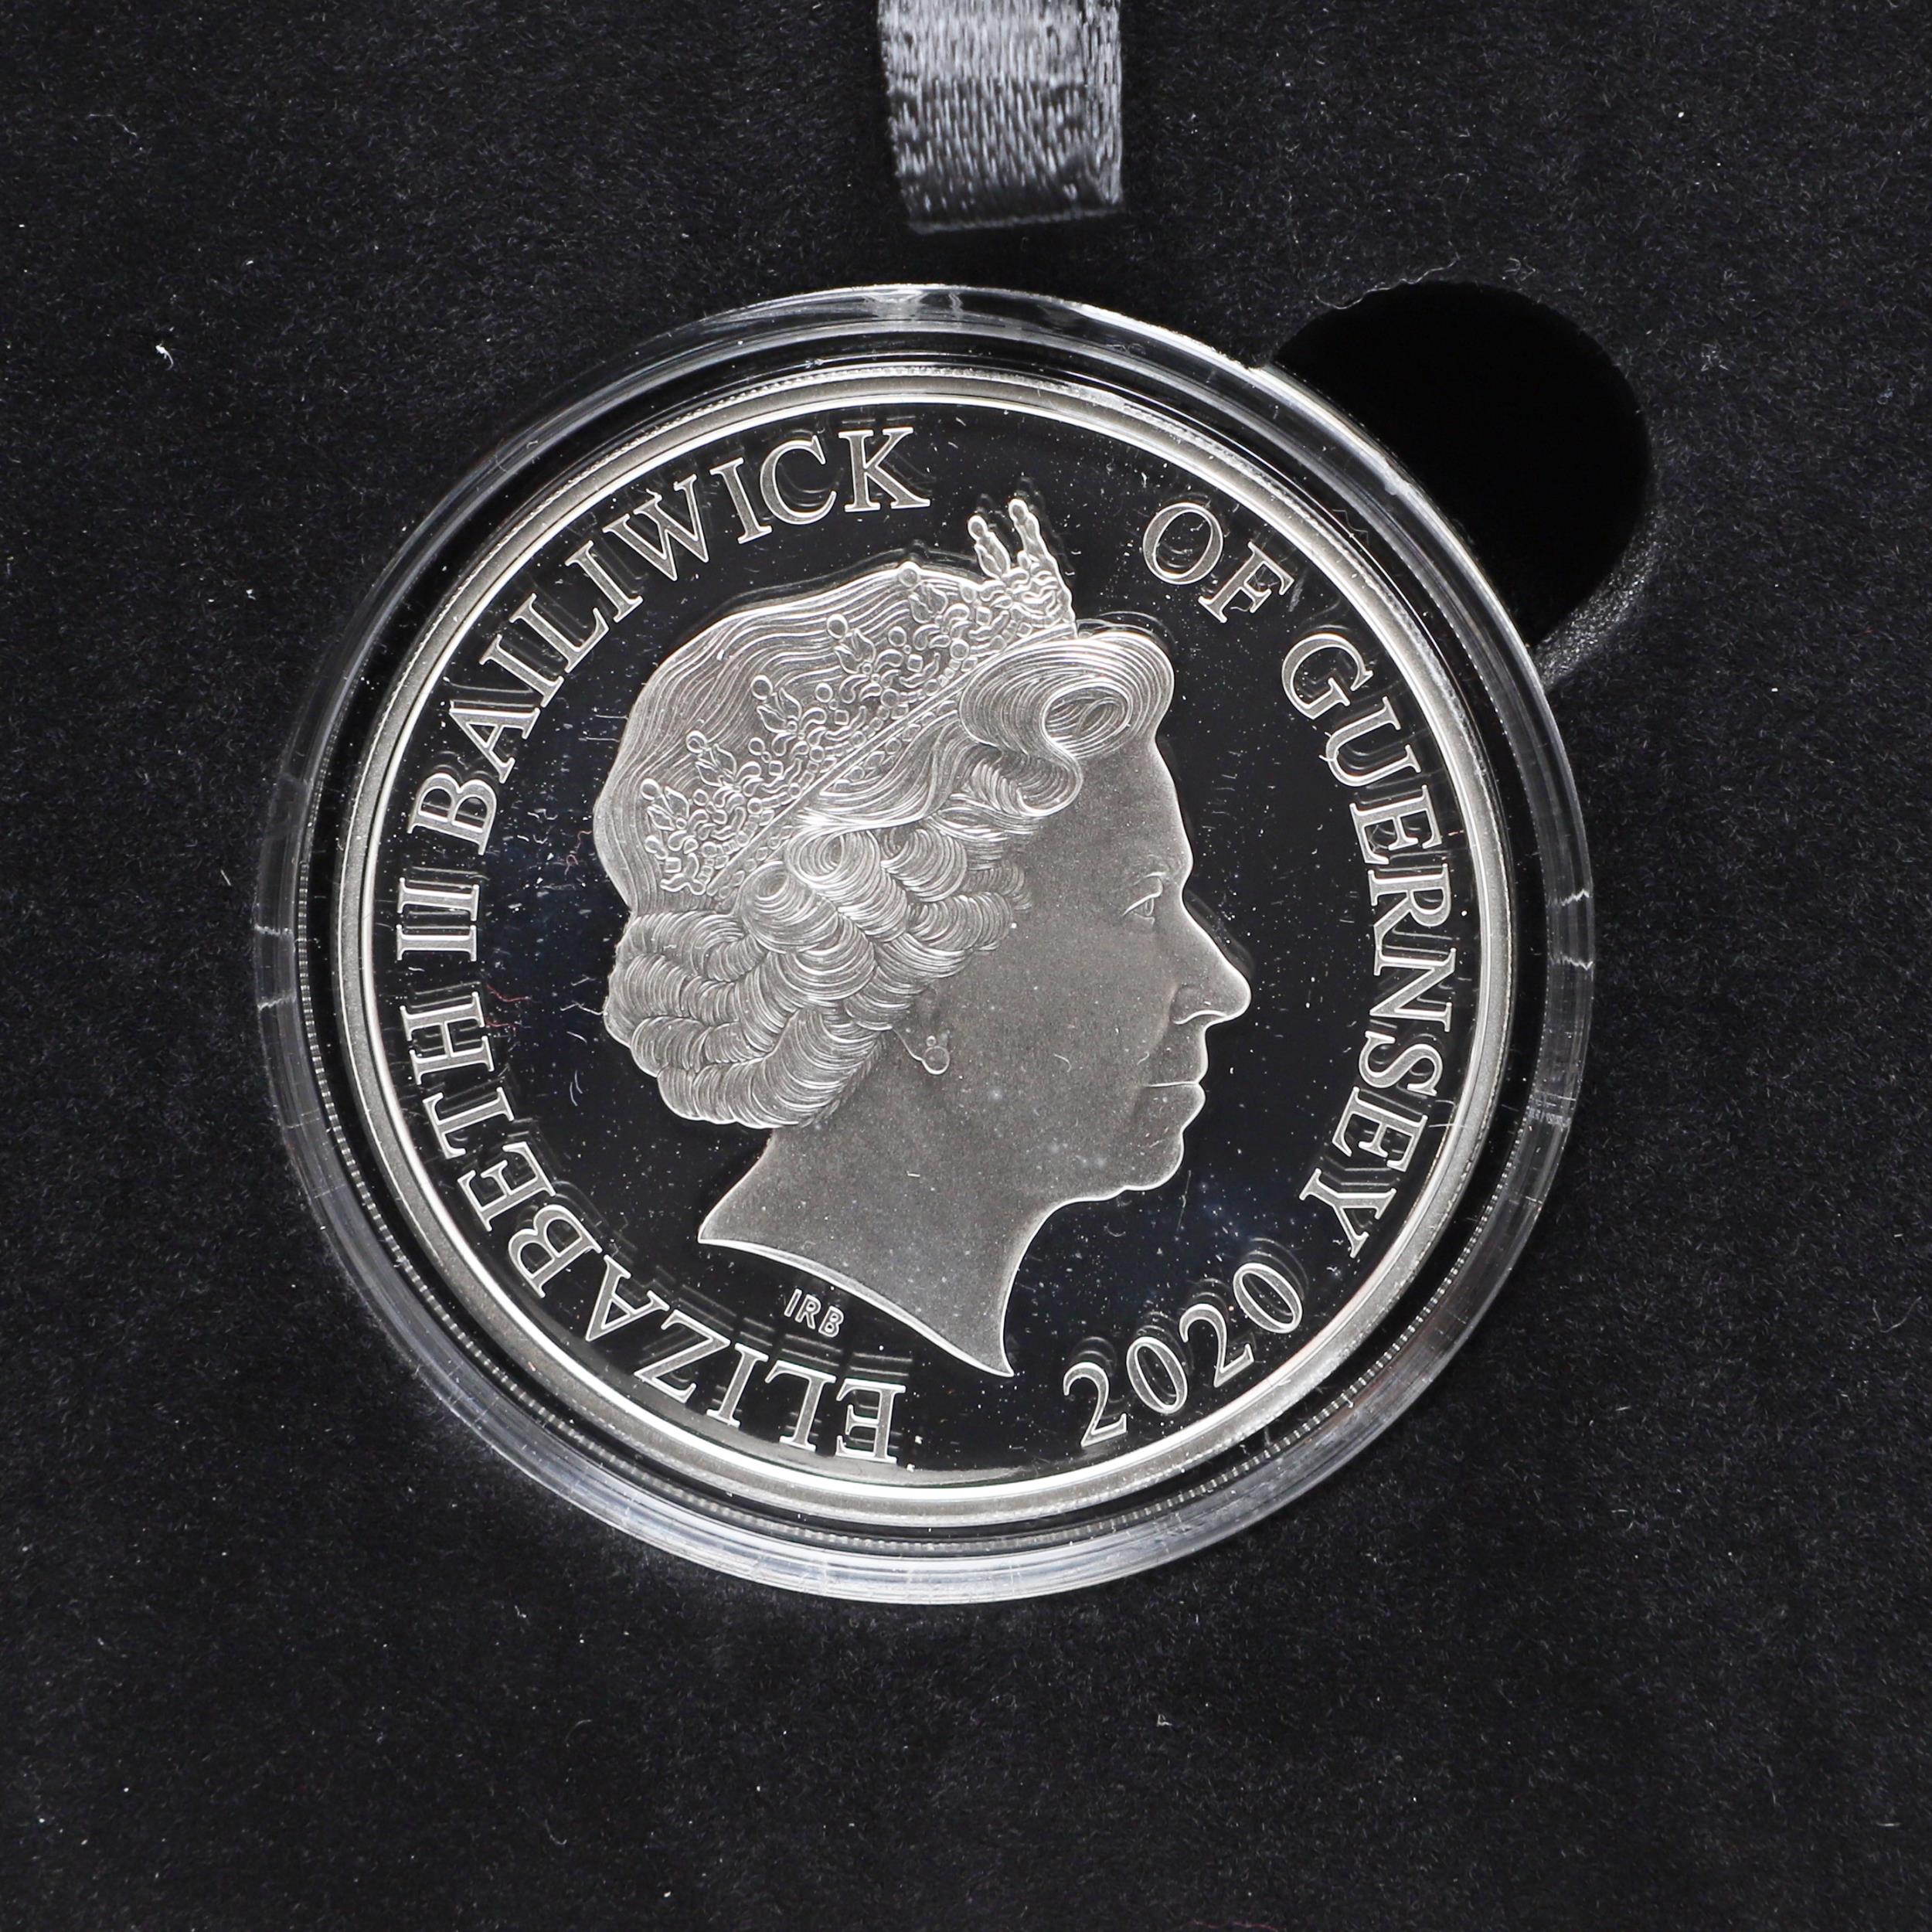 A COLLECTION OF MILITARY THEMED SILVER PROOF RECENT ISSUES 2014 - 2020. - Image 9 of 10